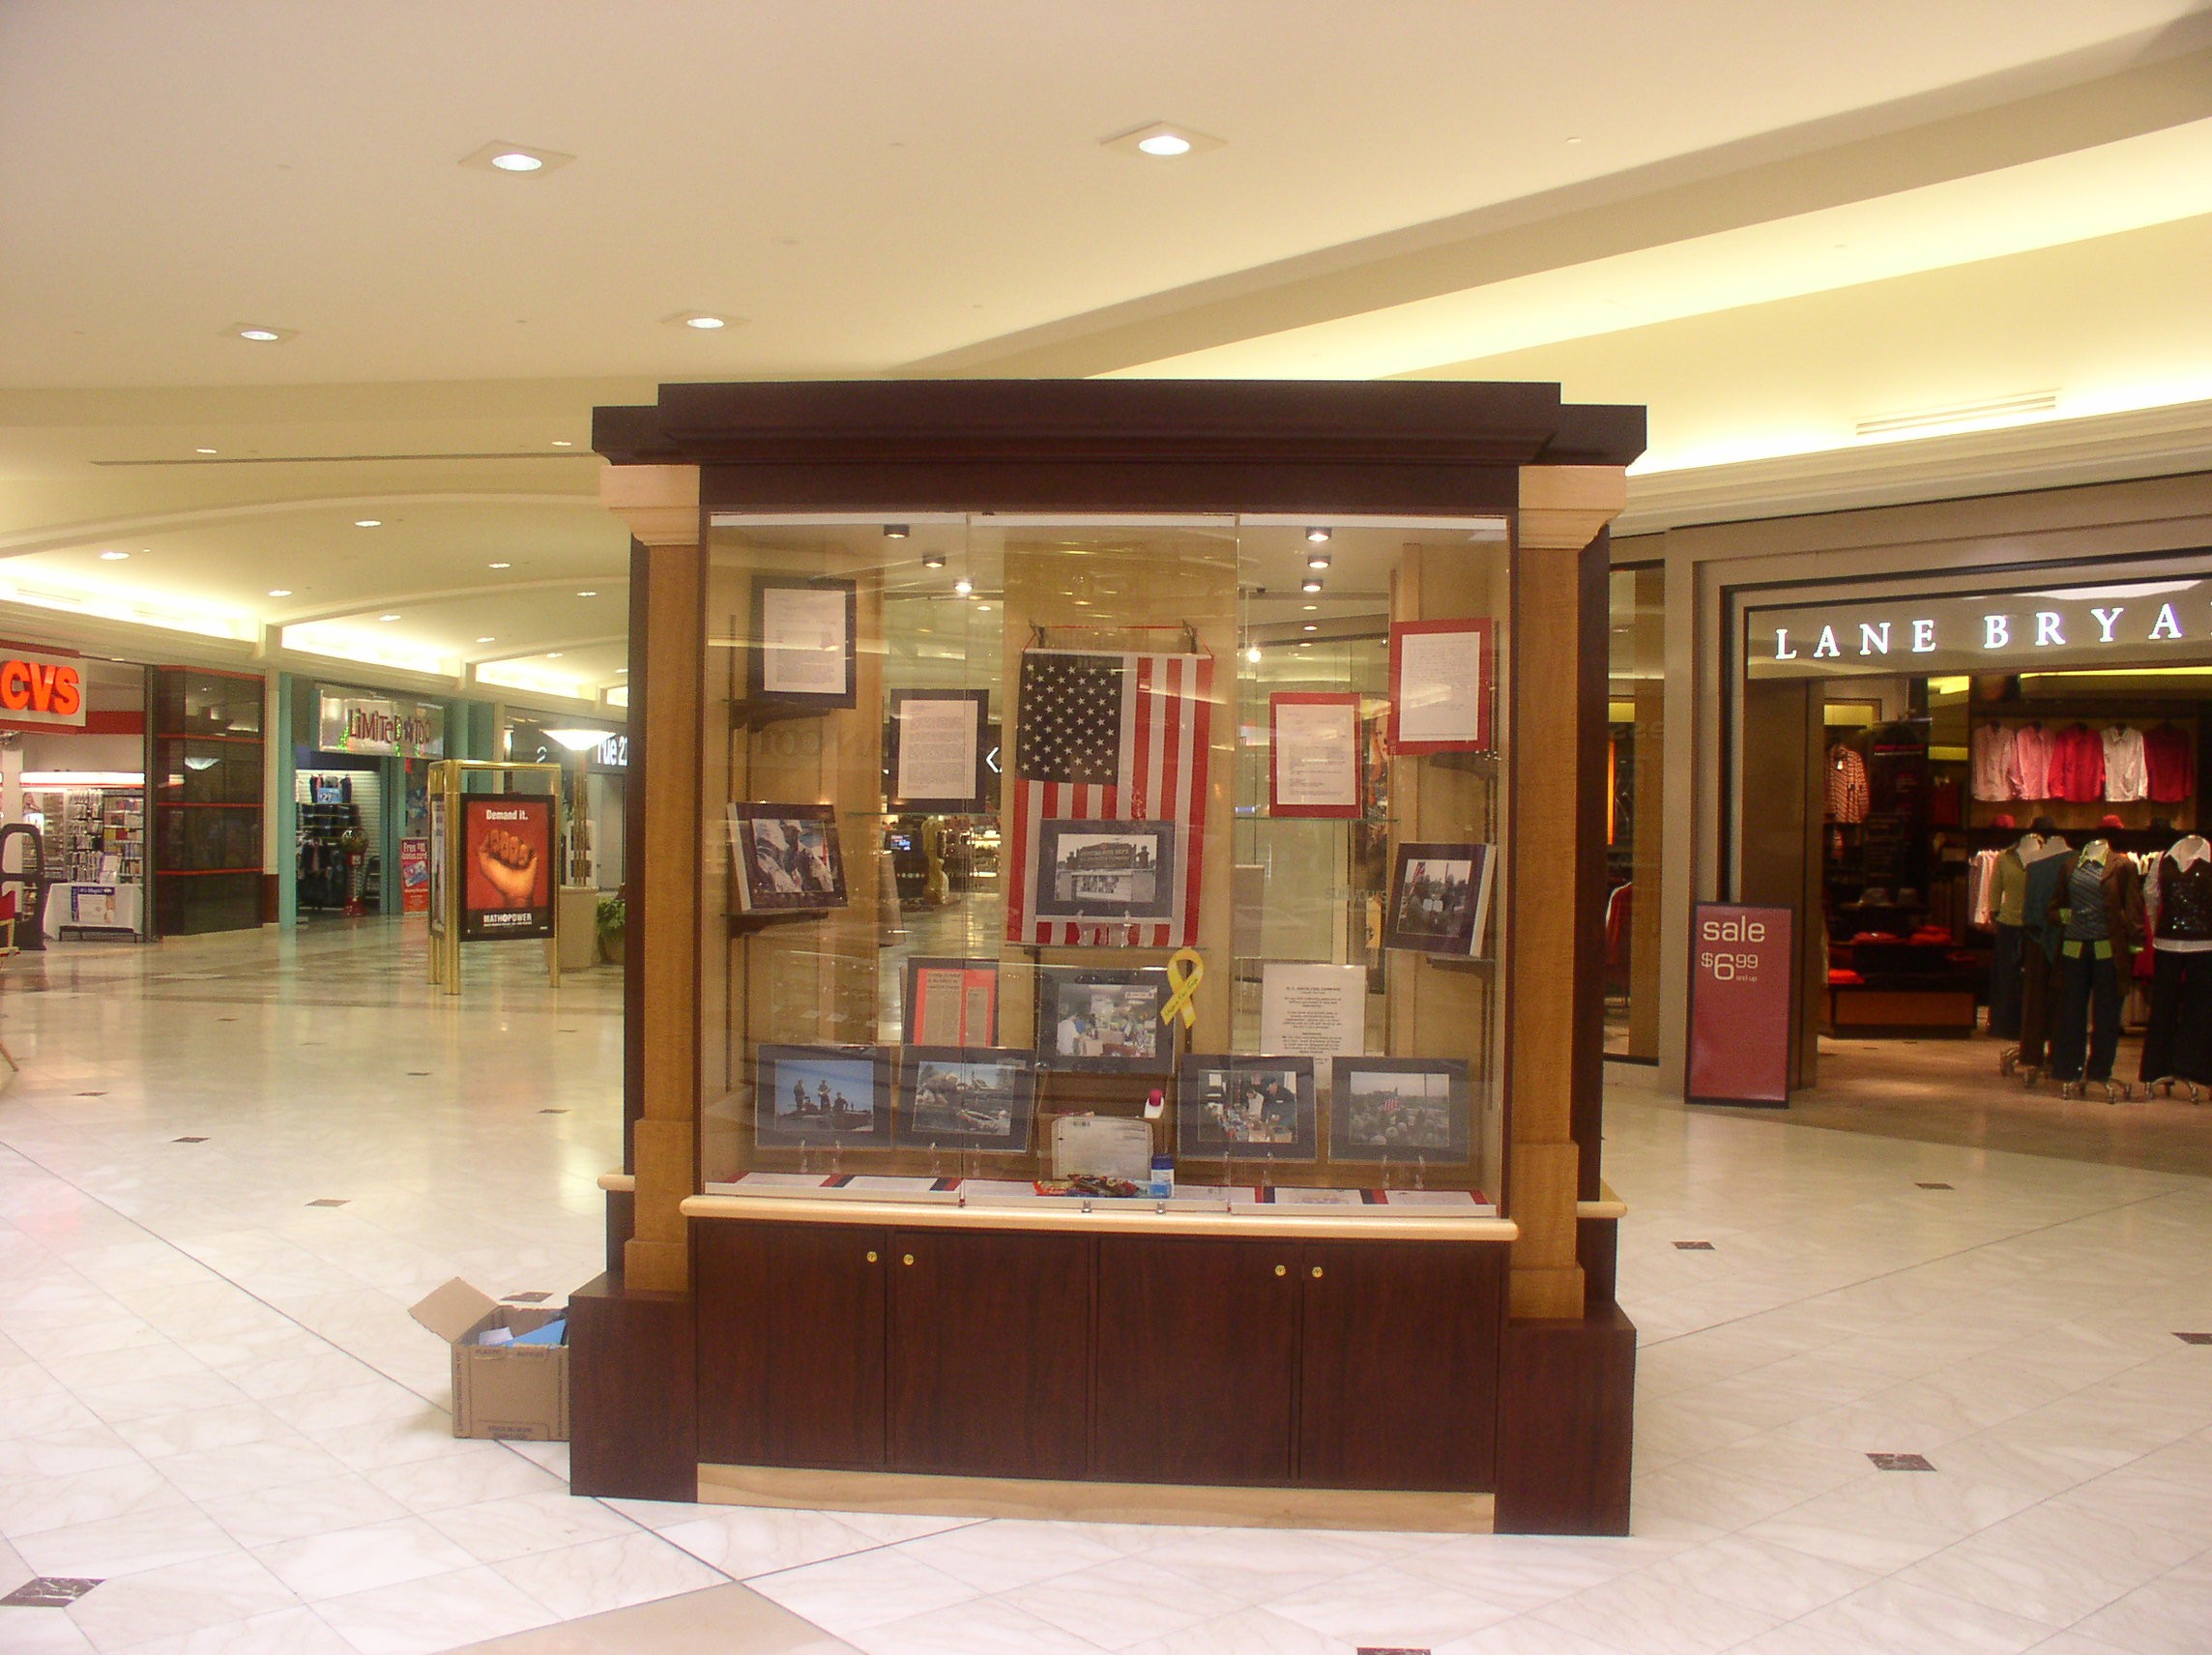 09-11-04  Other - Mall Display